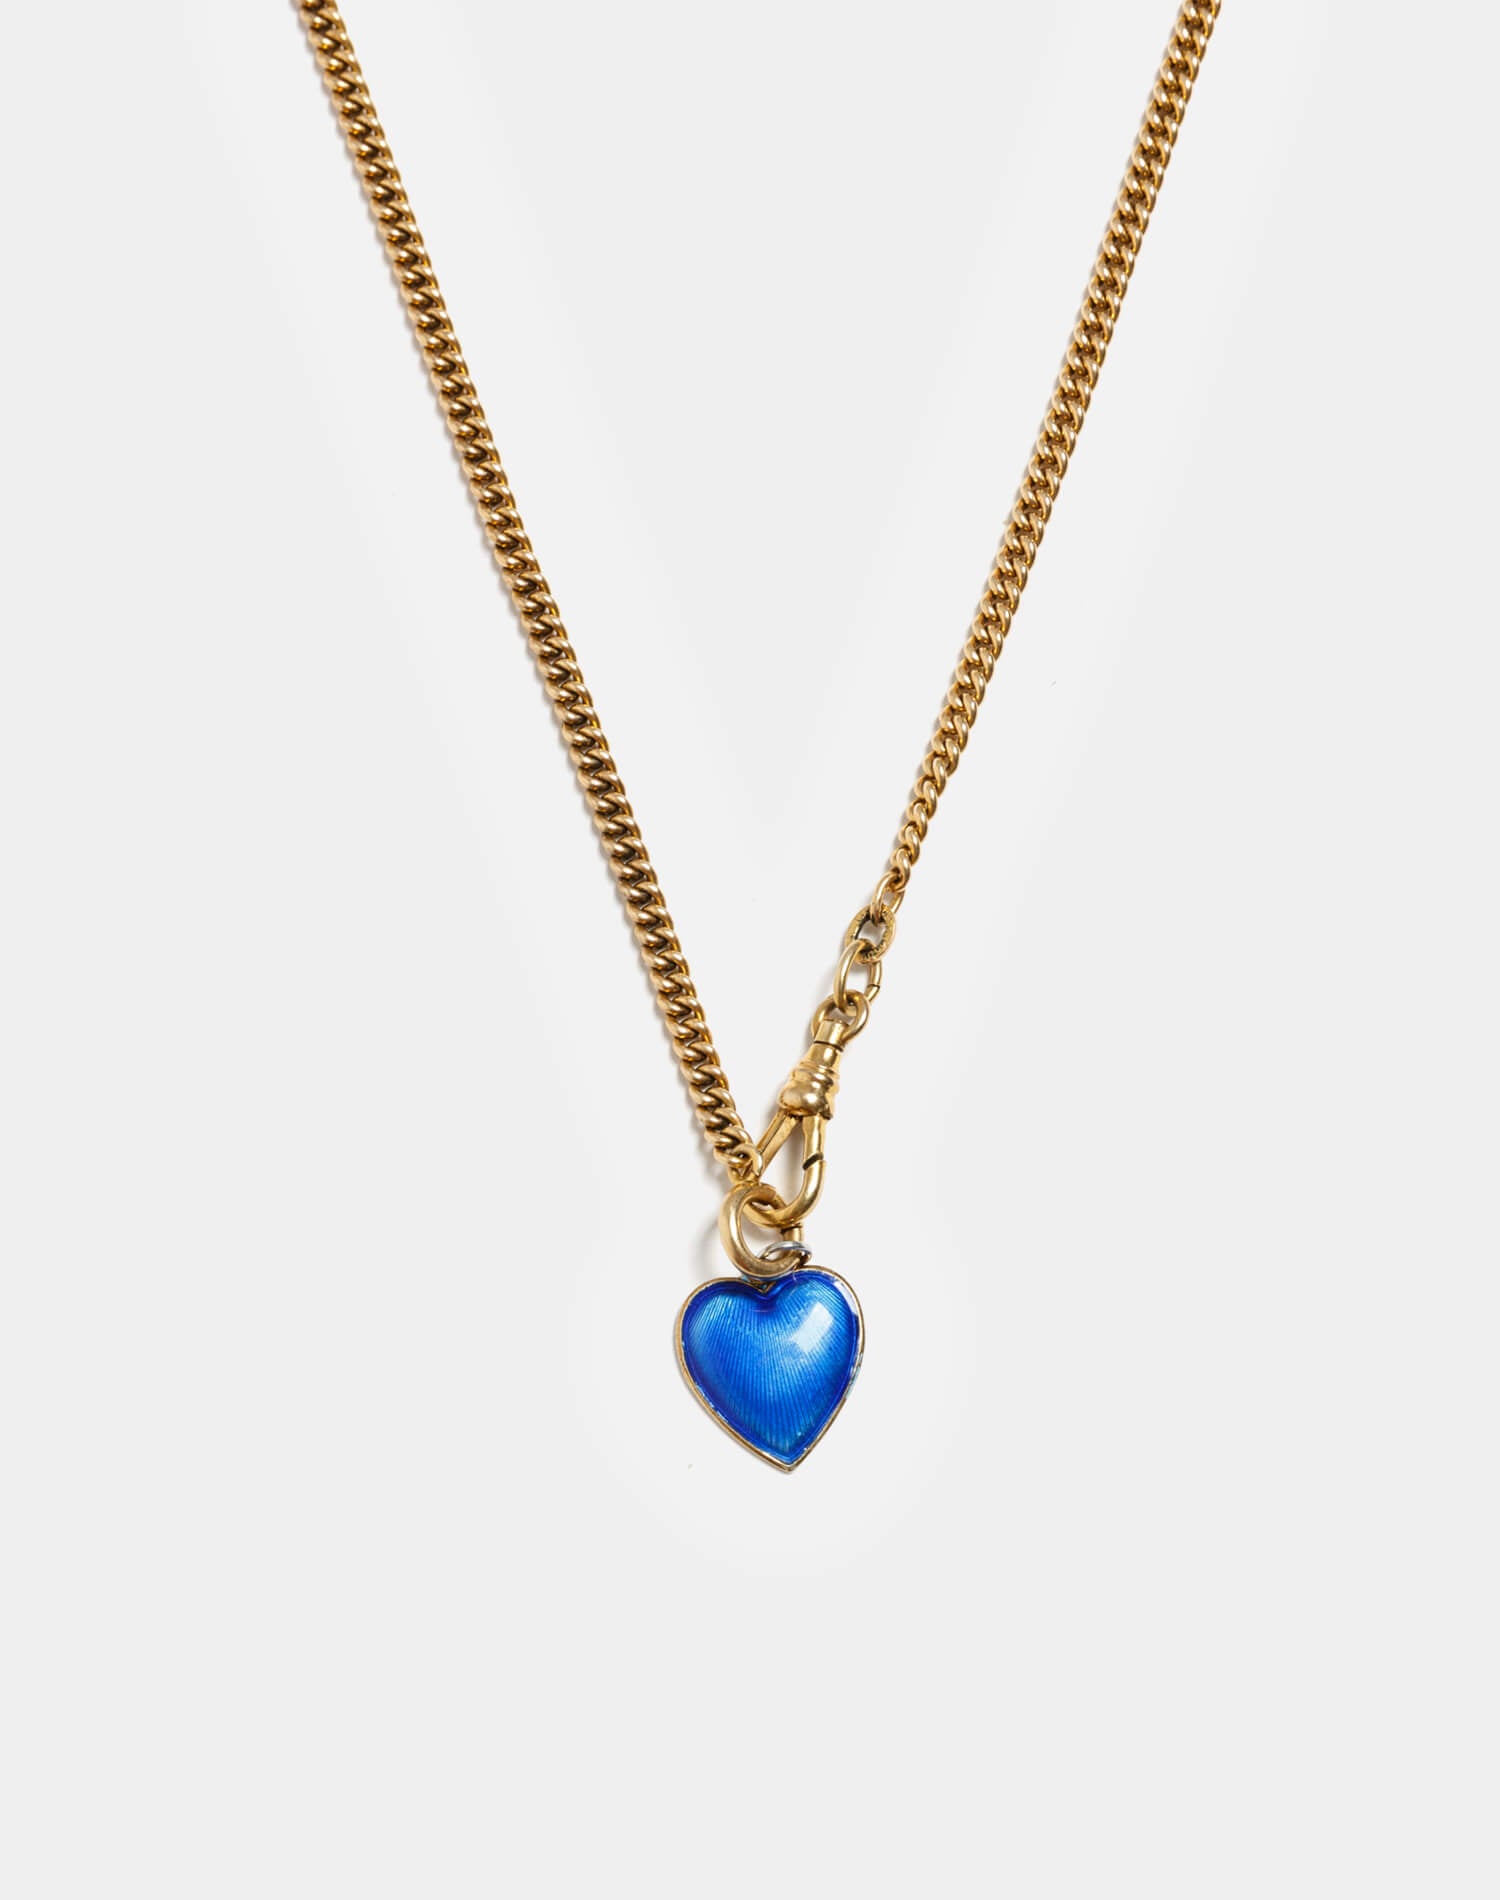 Marketplace 20s Gold Filled Chain With Sterling Guilloche Charm In Blue